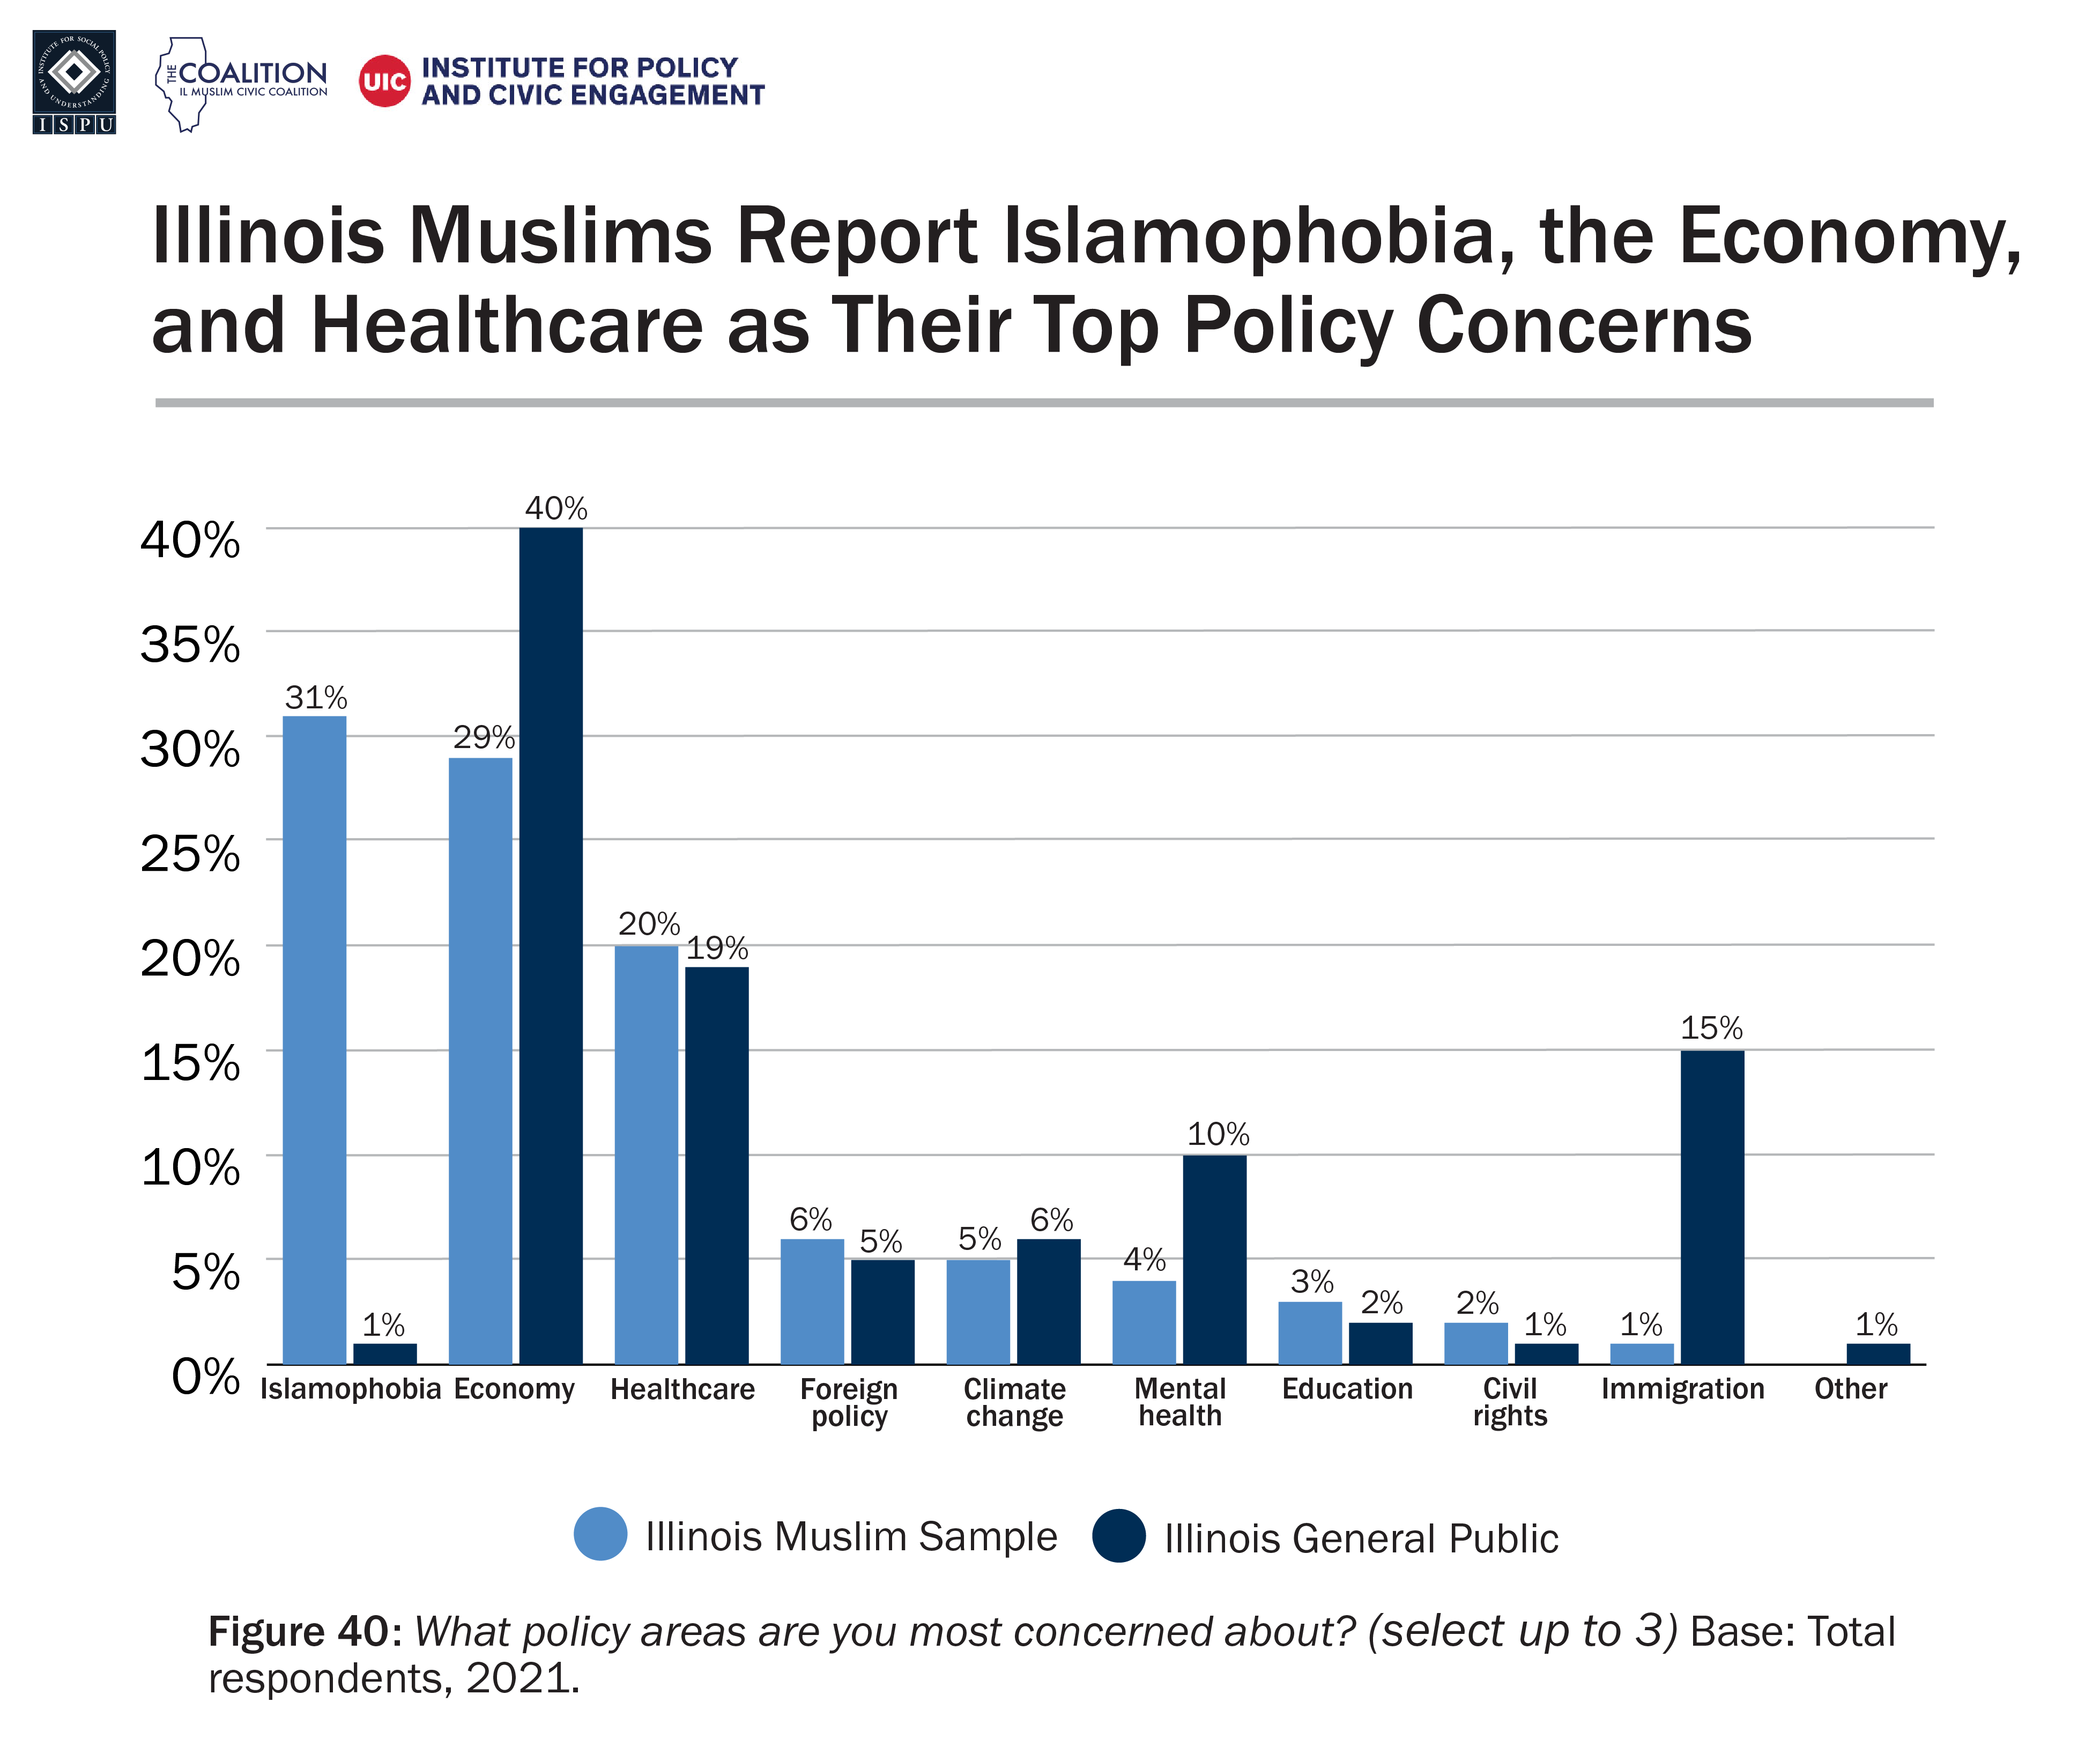 A bar graph showing top policy concerns cited by the Illinois Muslim sample and Illinois general public